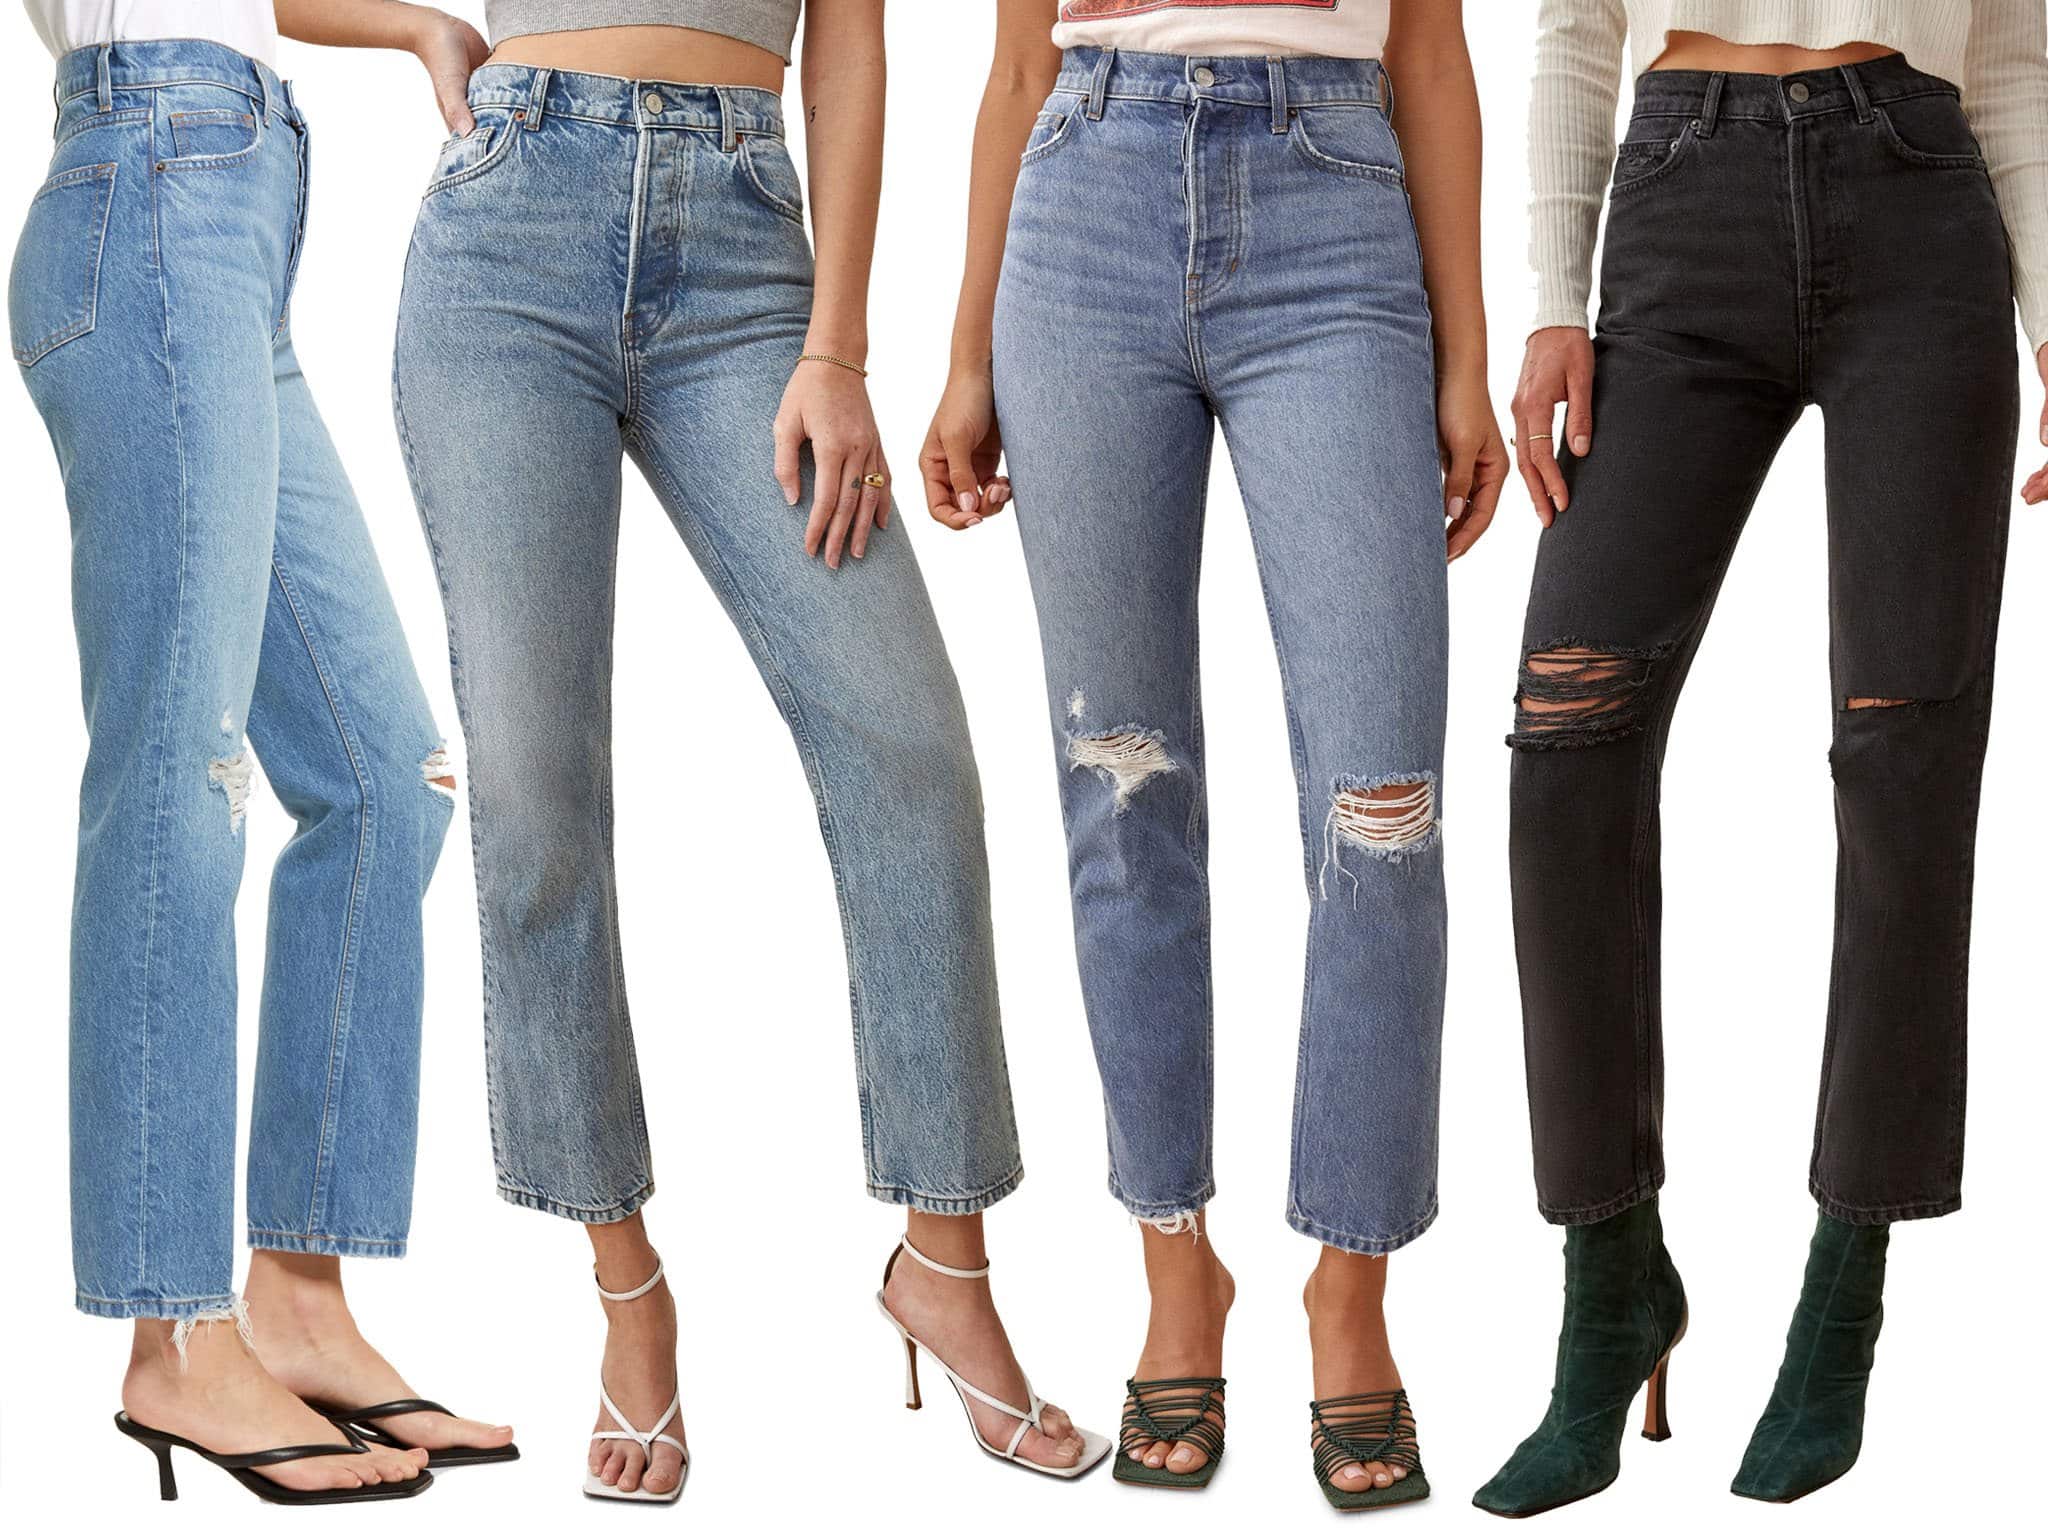 The Reformation Cynthia is a non-stretch fitted jeans with a high waist and a relaxed straight leg